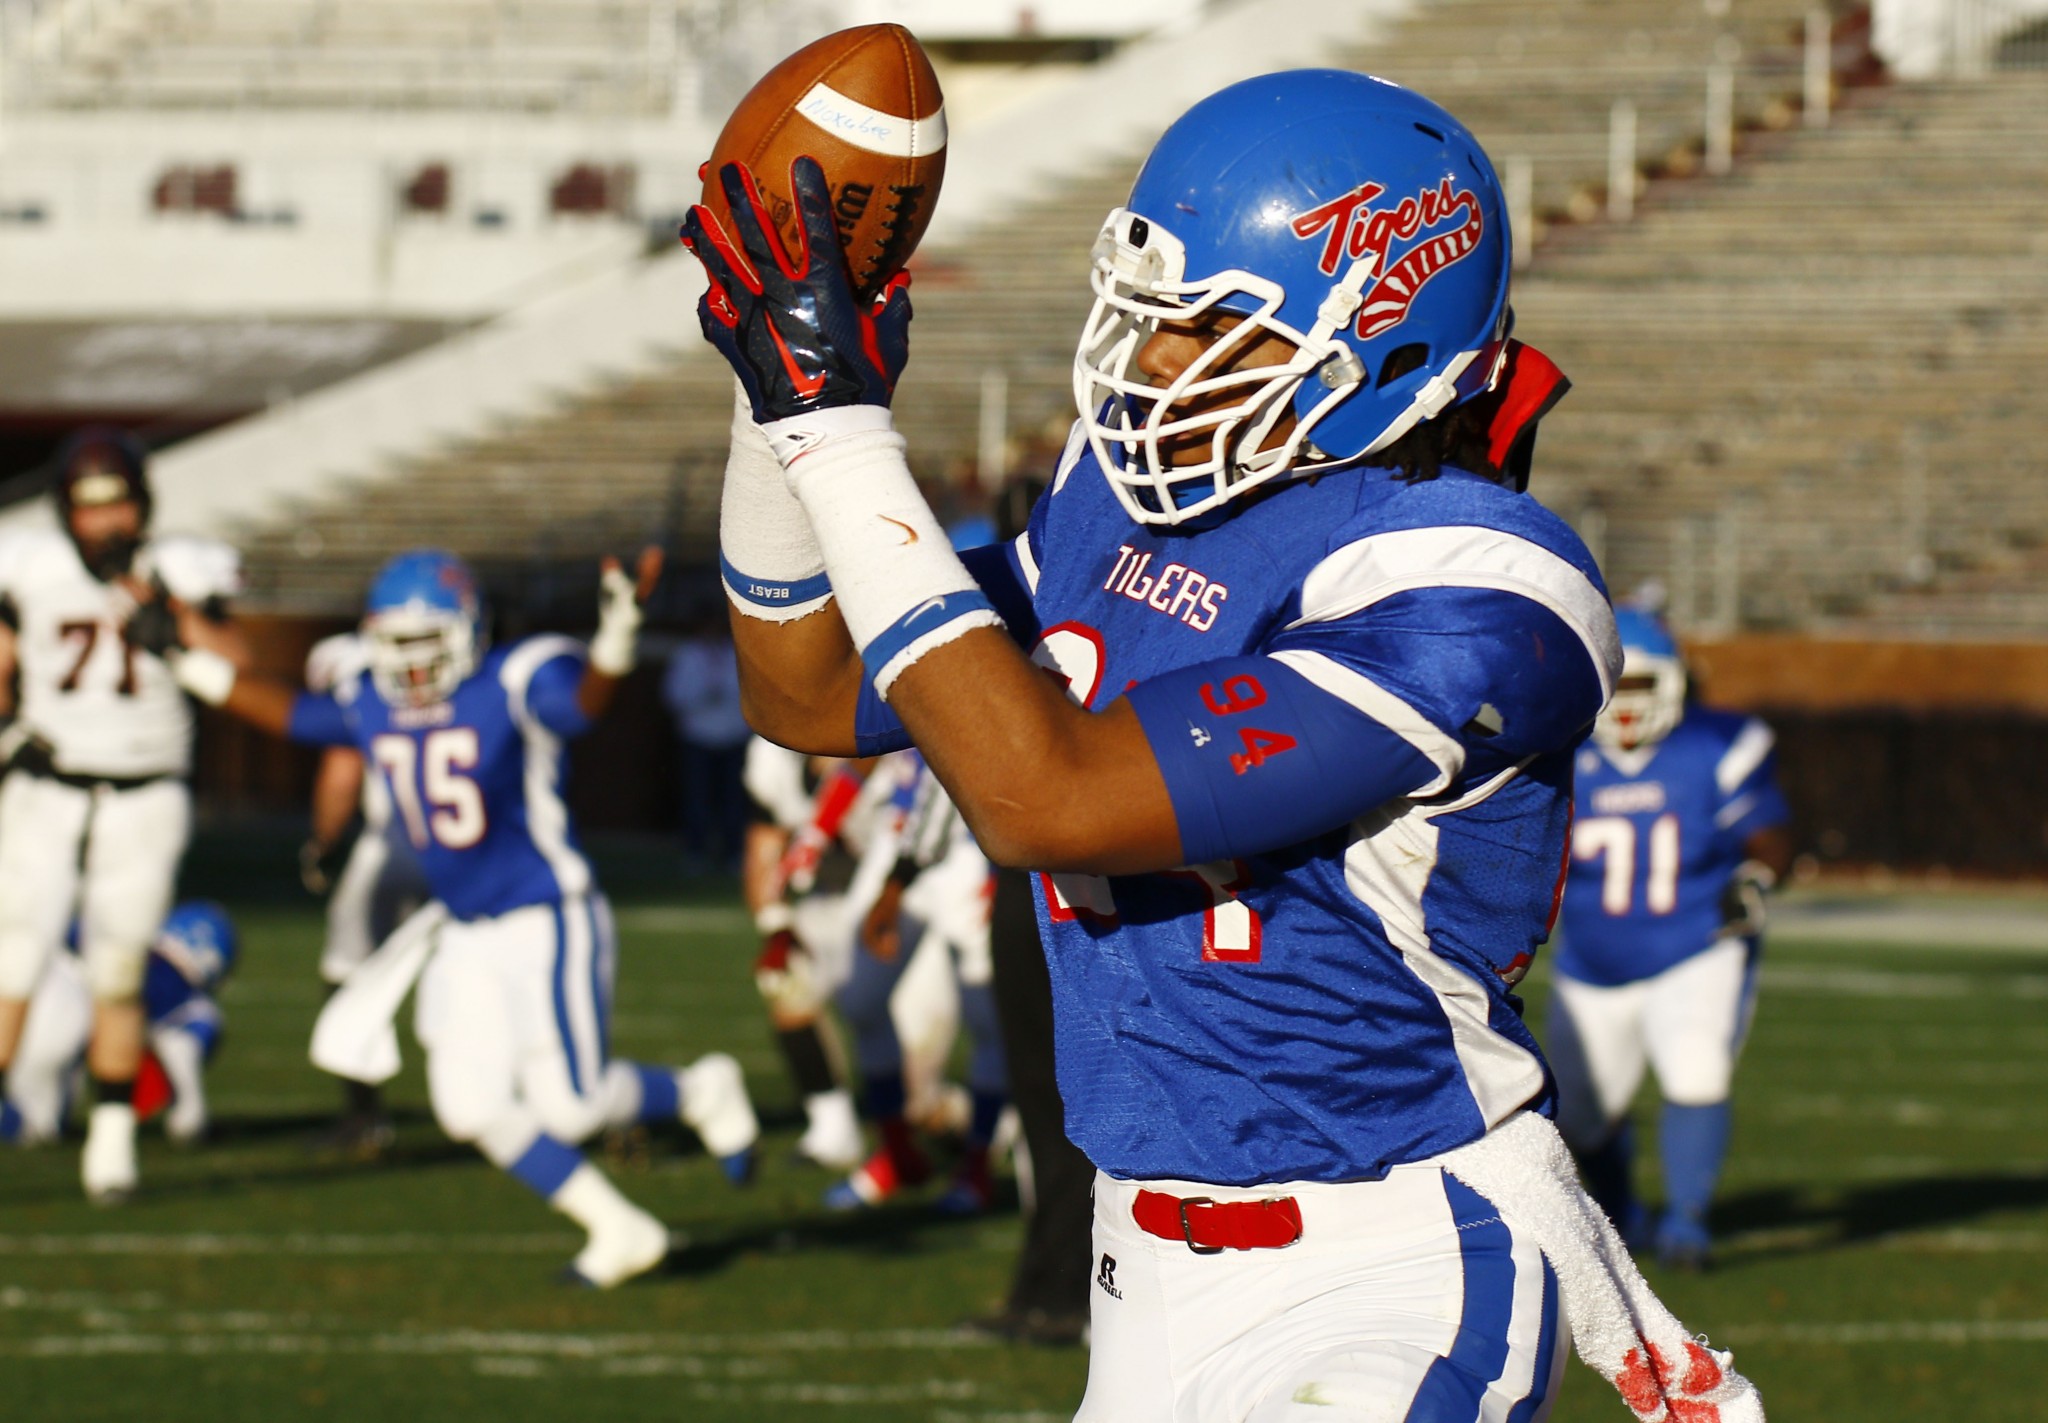 Noxubee County's Jeffery Simmons scores with a 17-yard touchdown pass against St. Stanislaus in the first half of their Mississippi 4A Championship high school football game on Saturday, Dec. 6, 2014, in Starkville, Miss. (AP Photo/Rogelio V. Solis)